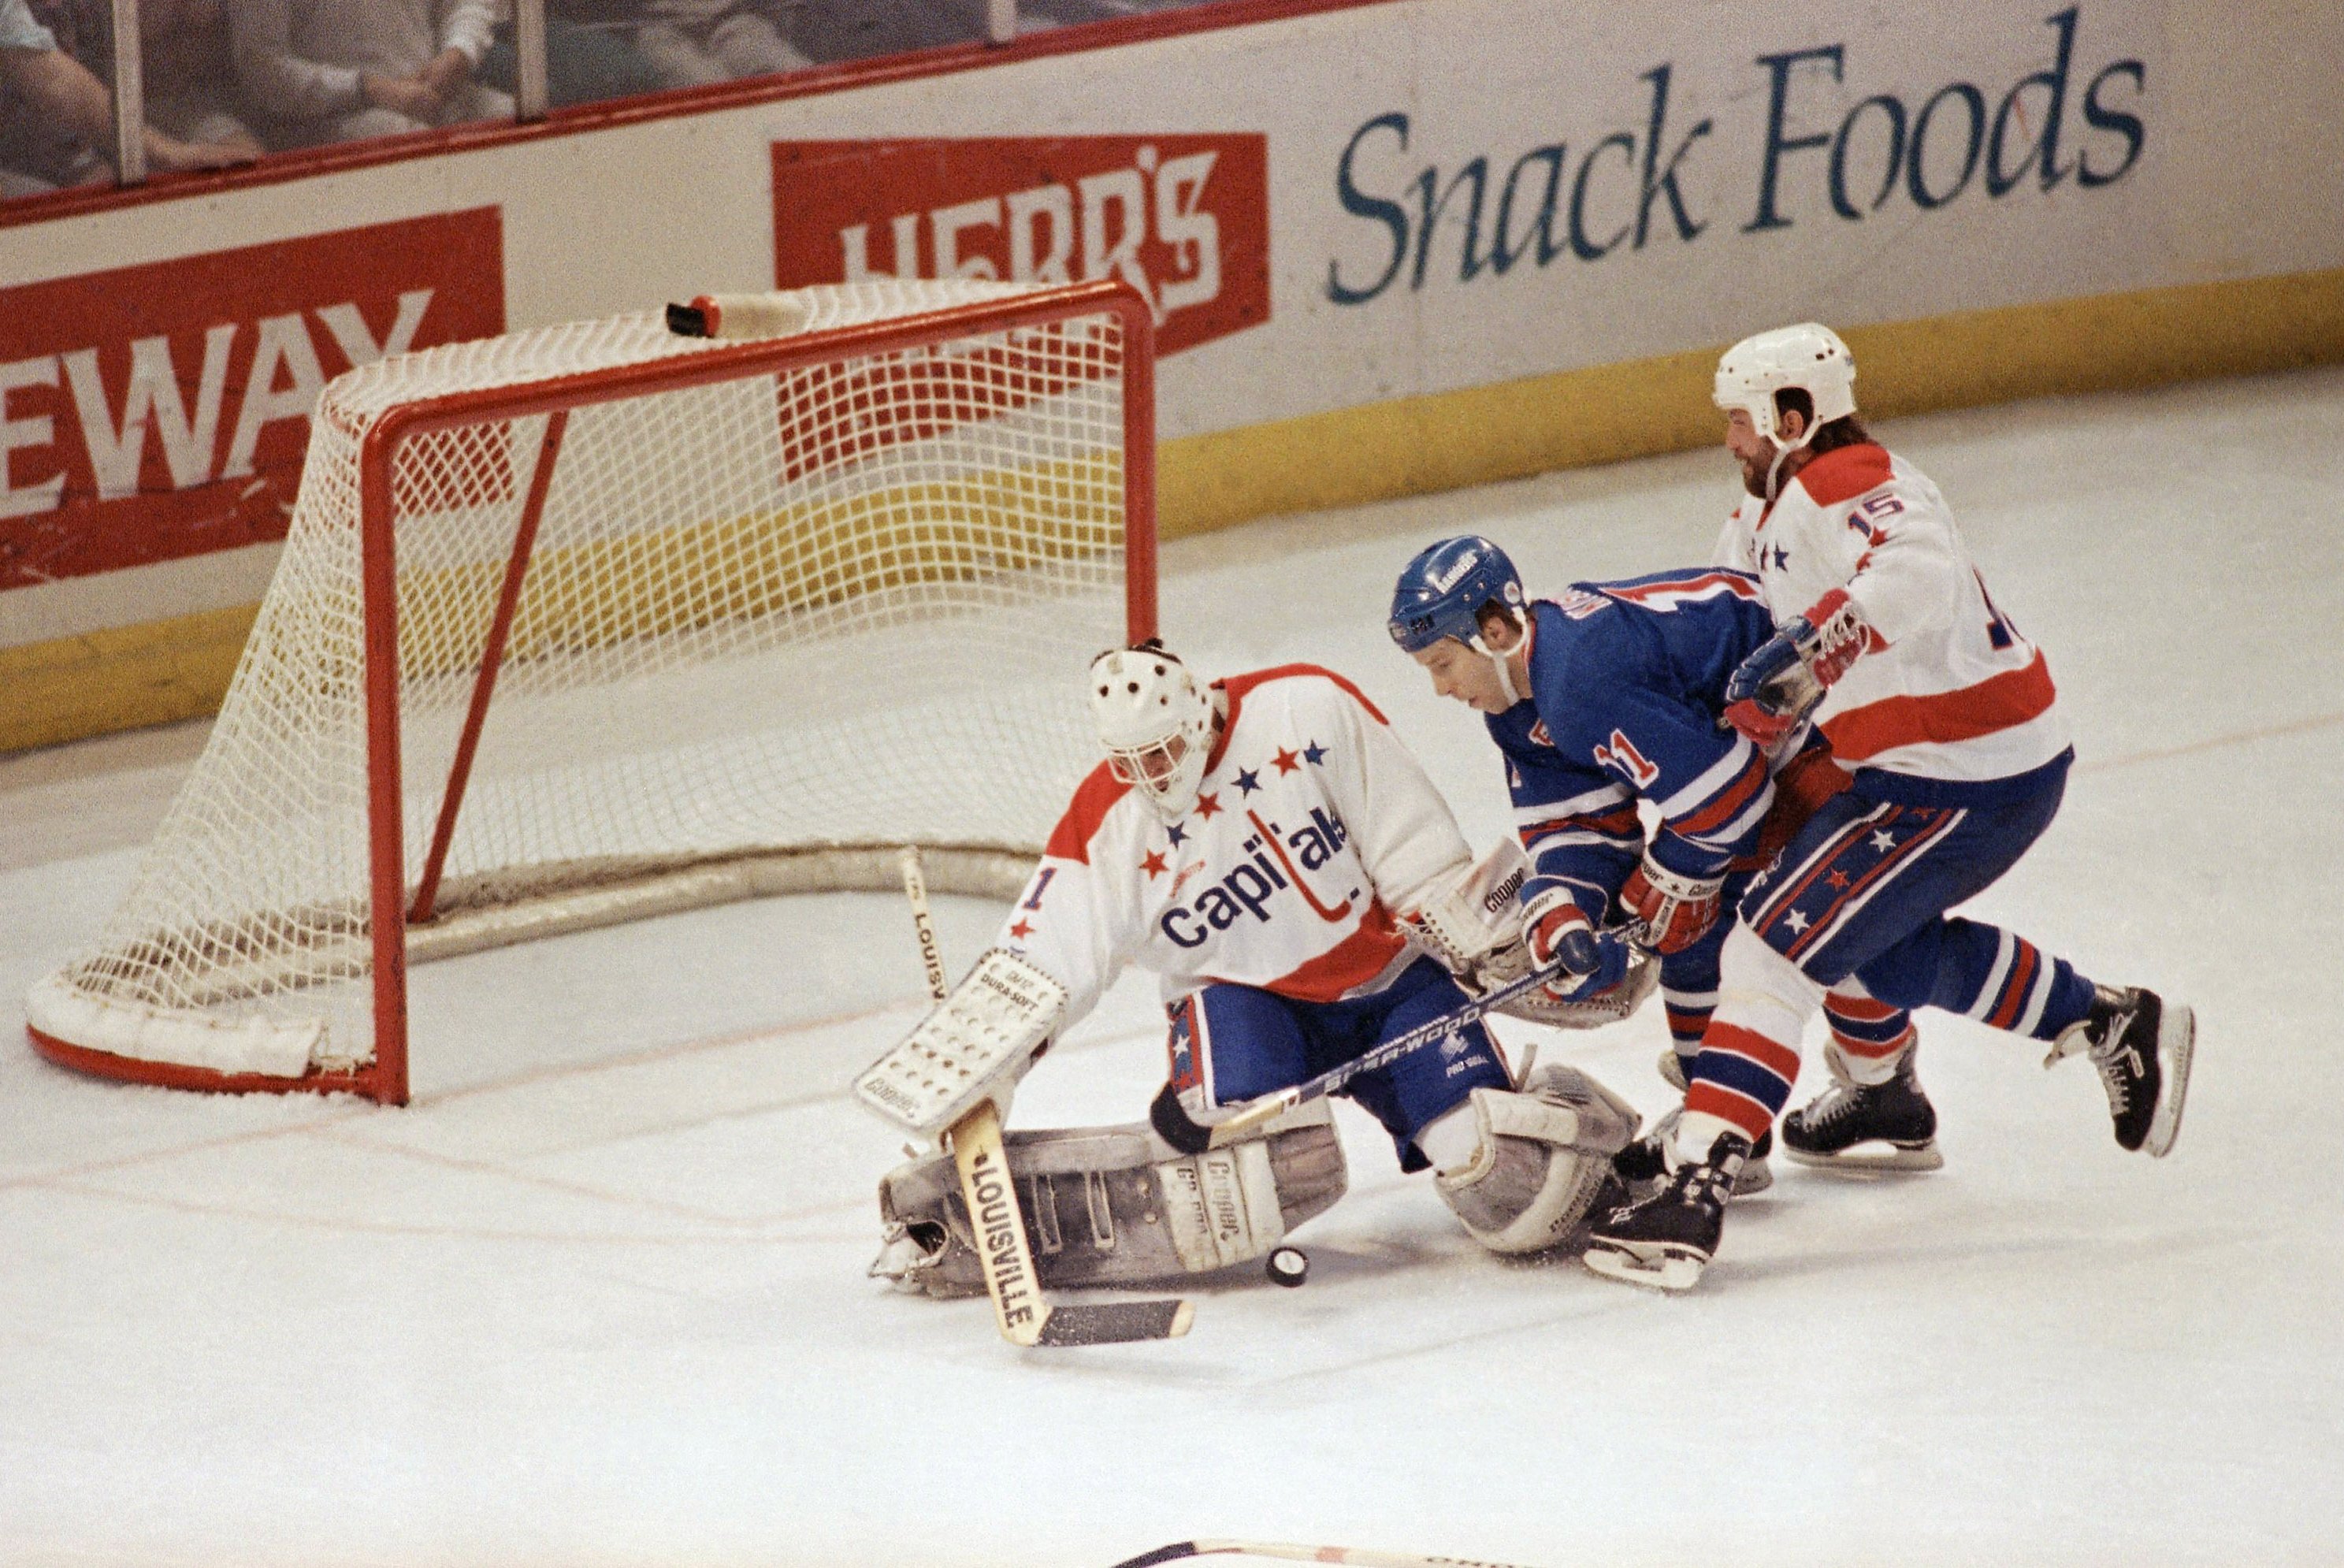 THE PUCK REPORT: Today In NHL History - Linden Trade (VAN-NYI)